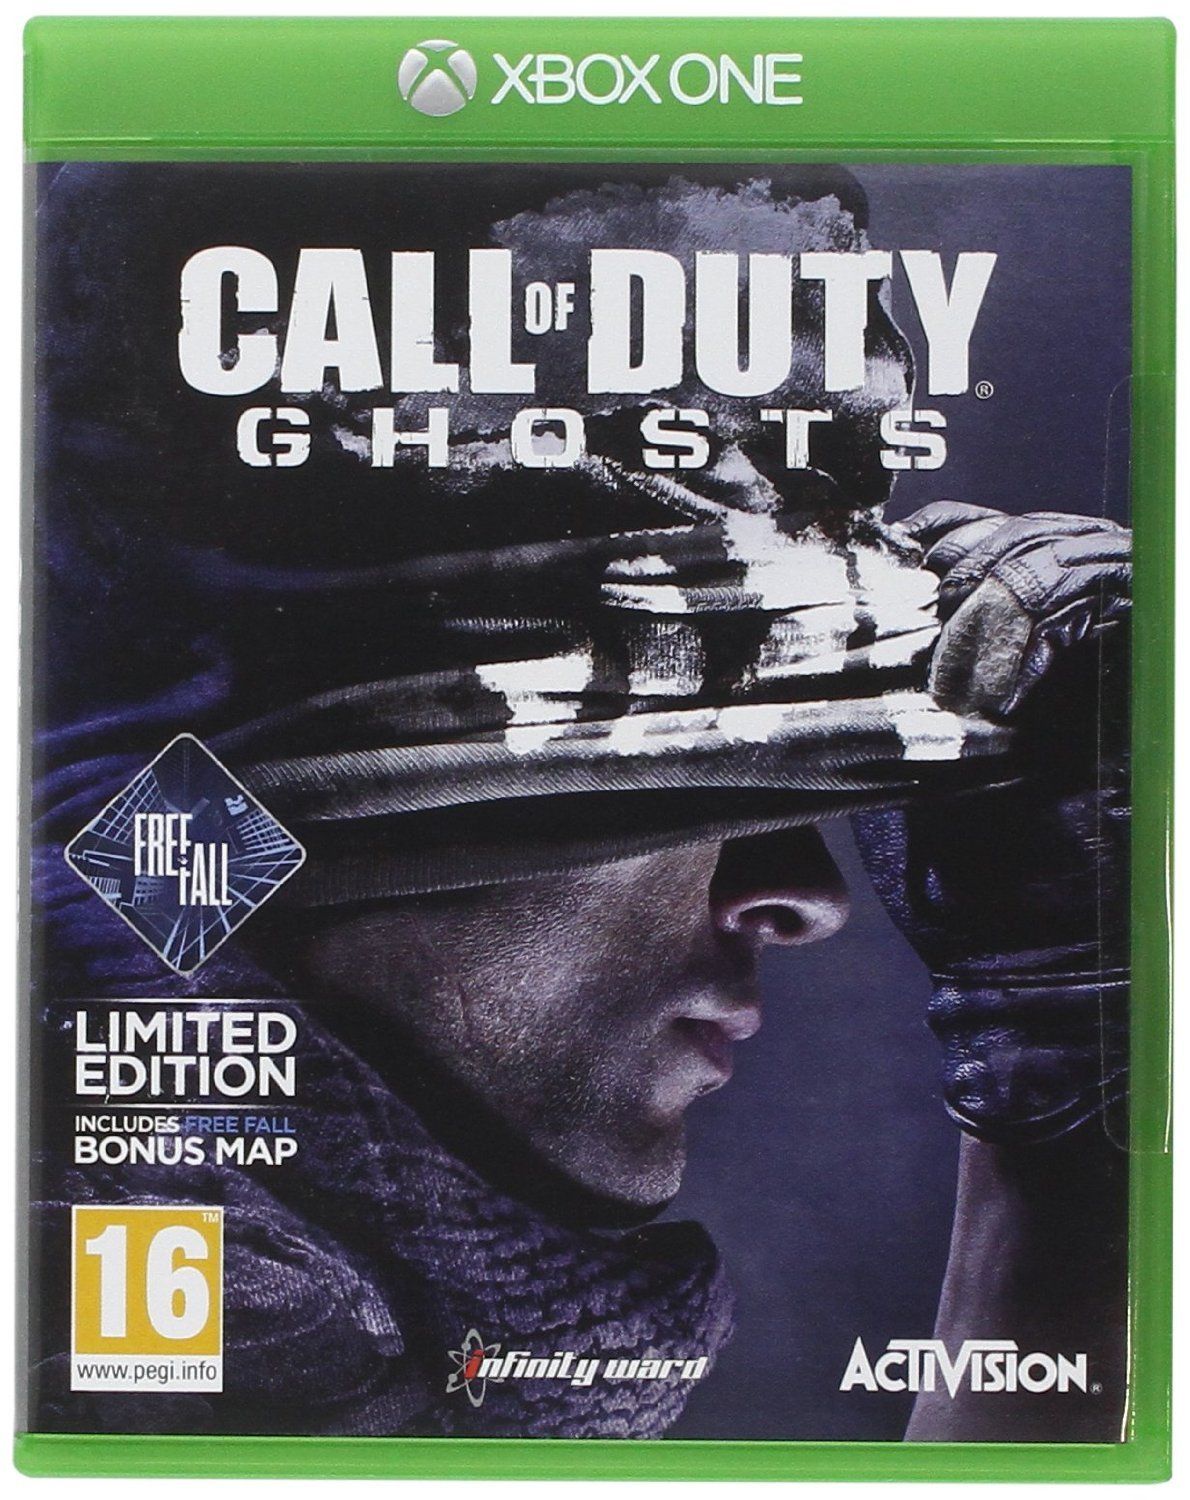 Call of Duty Ghosts Limited Edition Freefall for (Xbox One) NEW Sealed UK Stock